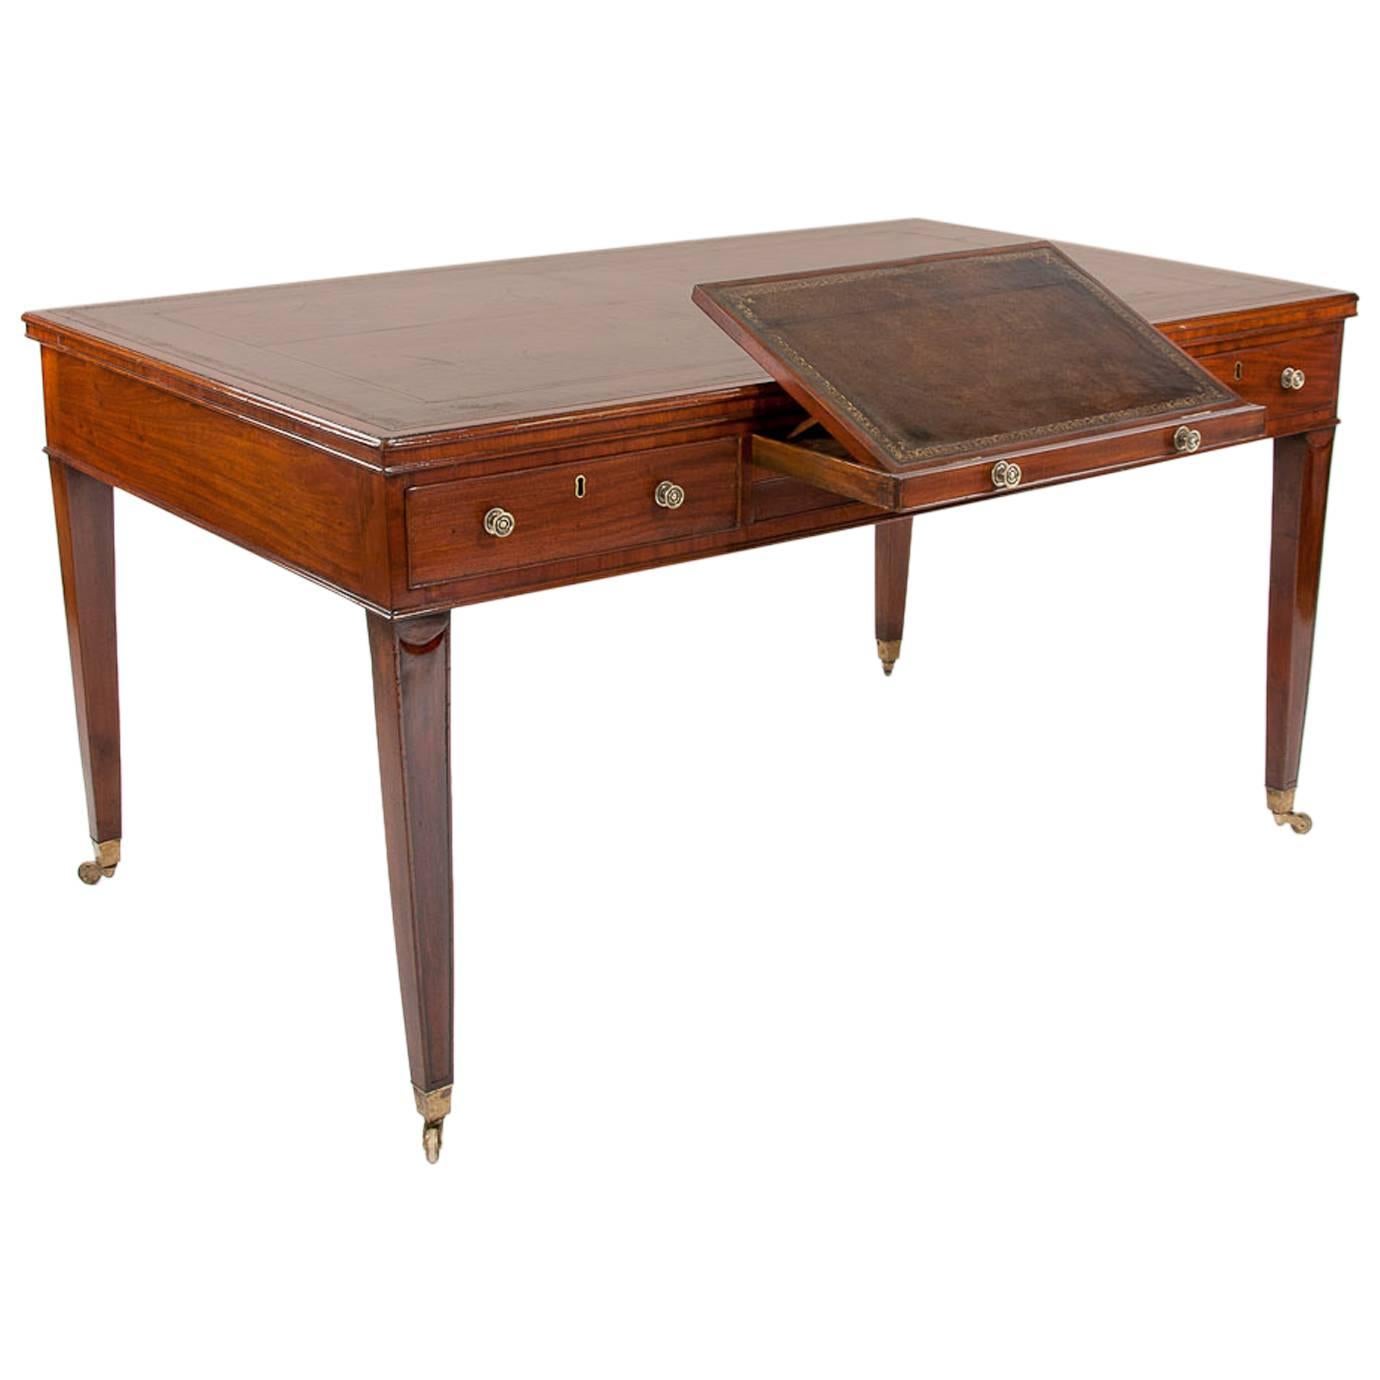 Rare Georgian Partners Writing Table with Adjustable Writing Slopes